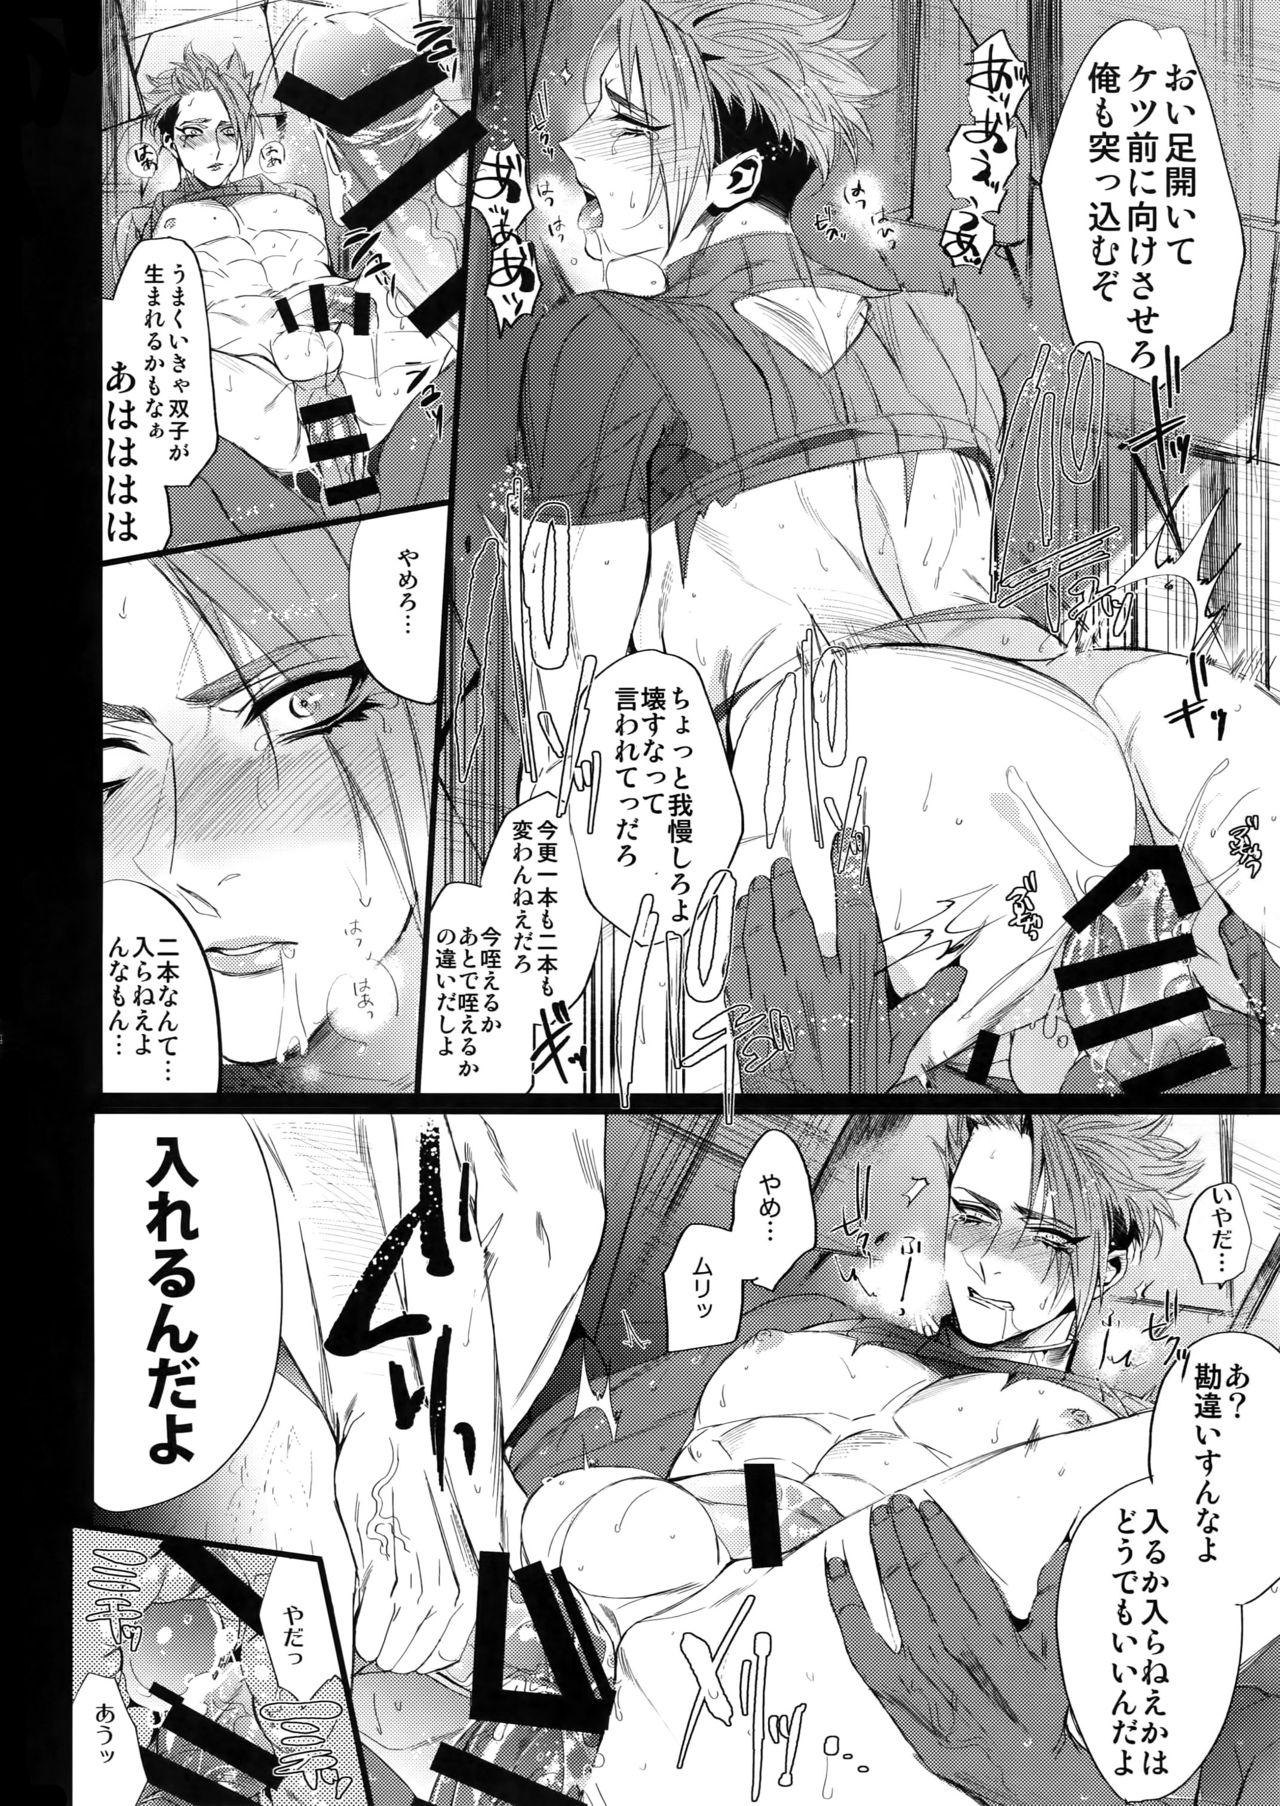 Ass Sex From Dusk Till The End - Fate grand order Gaydudes - Page 13